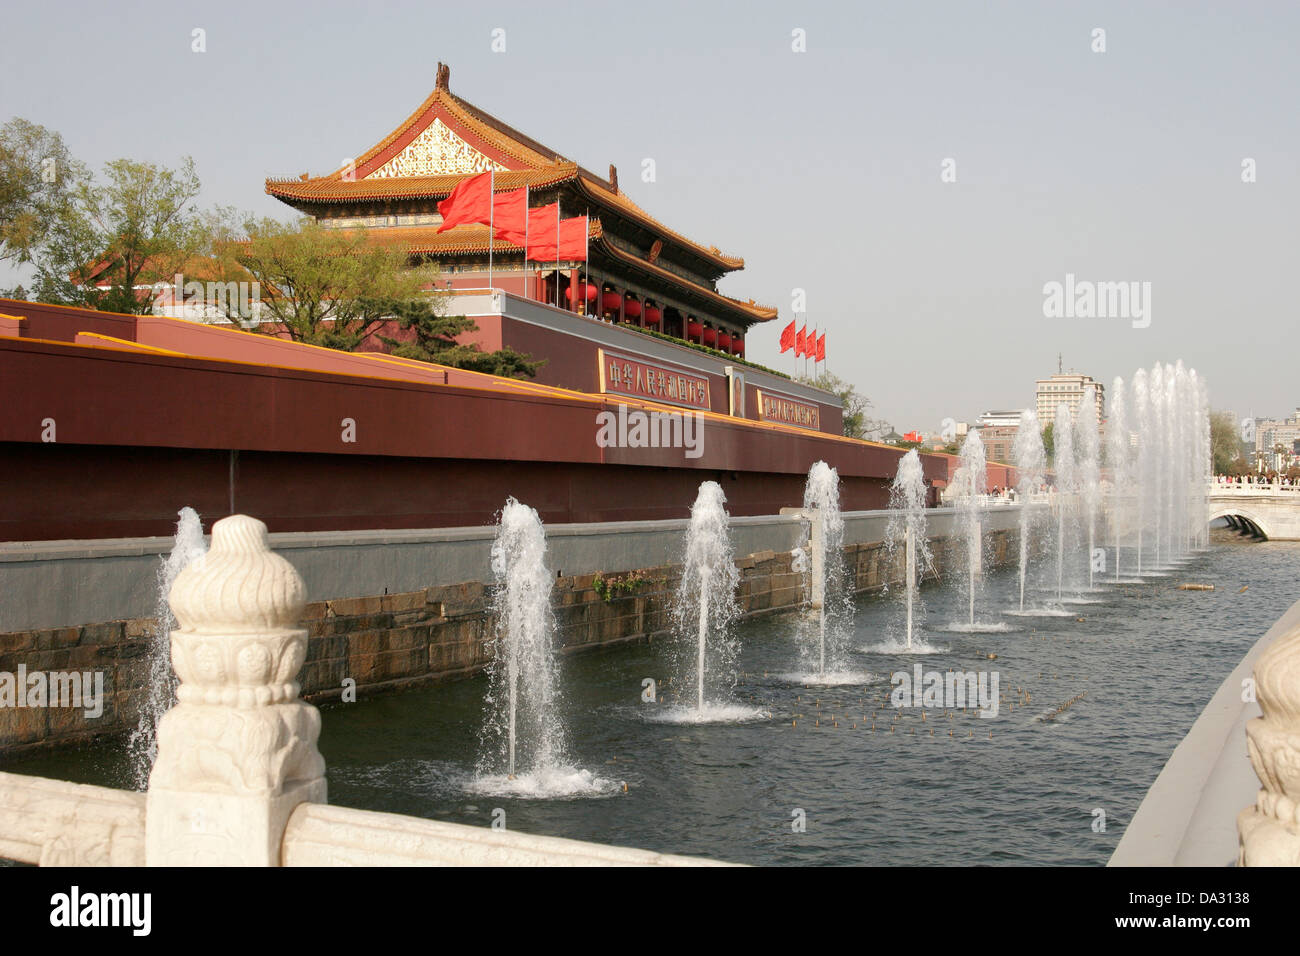 Fountains in front of the Gate of Heavenly Peace,  entrance to Forbidden City, Tiananmen Square, Beijing, China Stock Photo